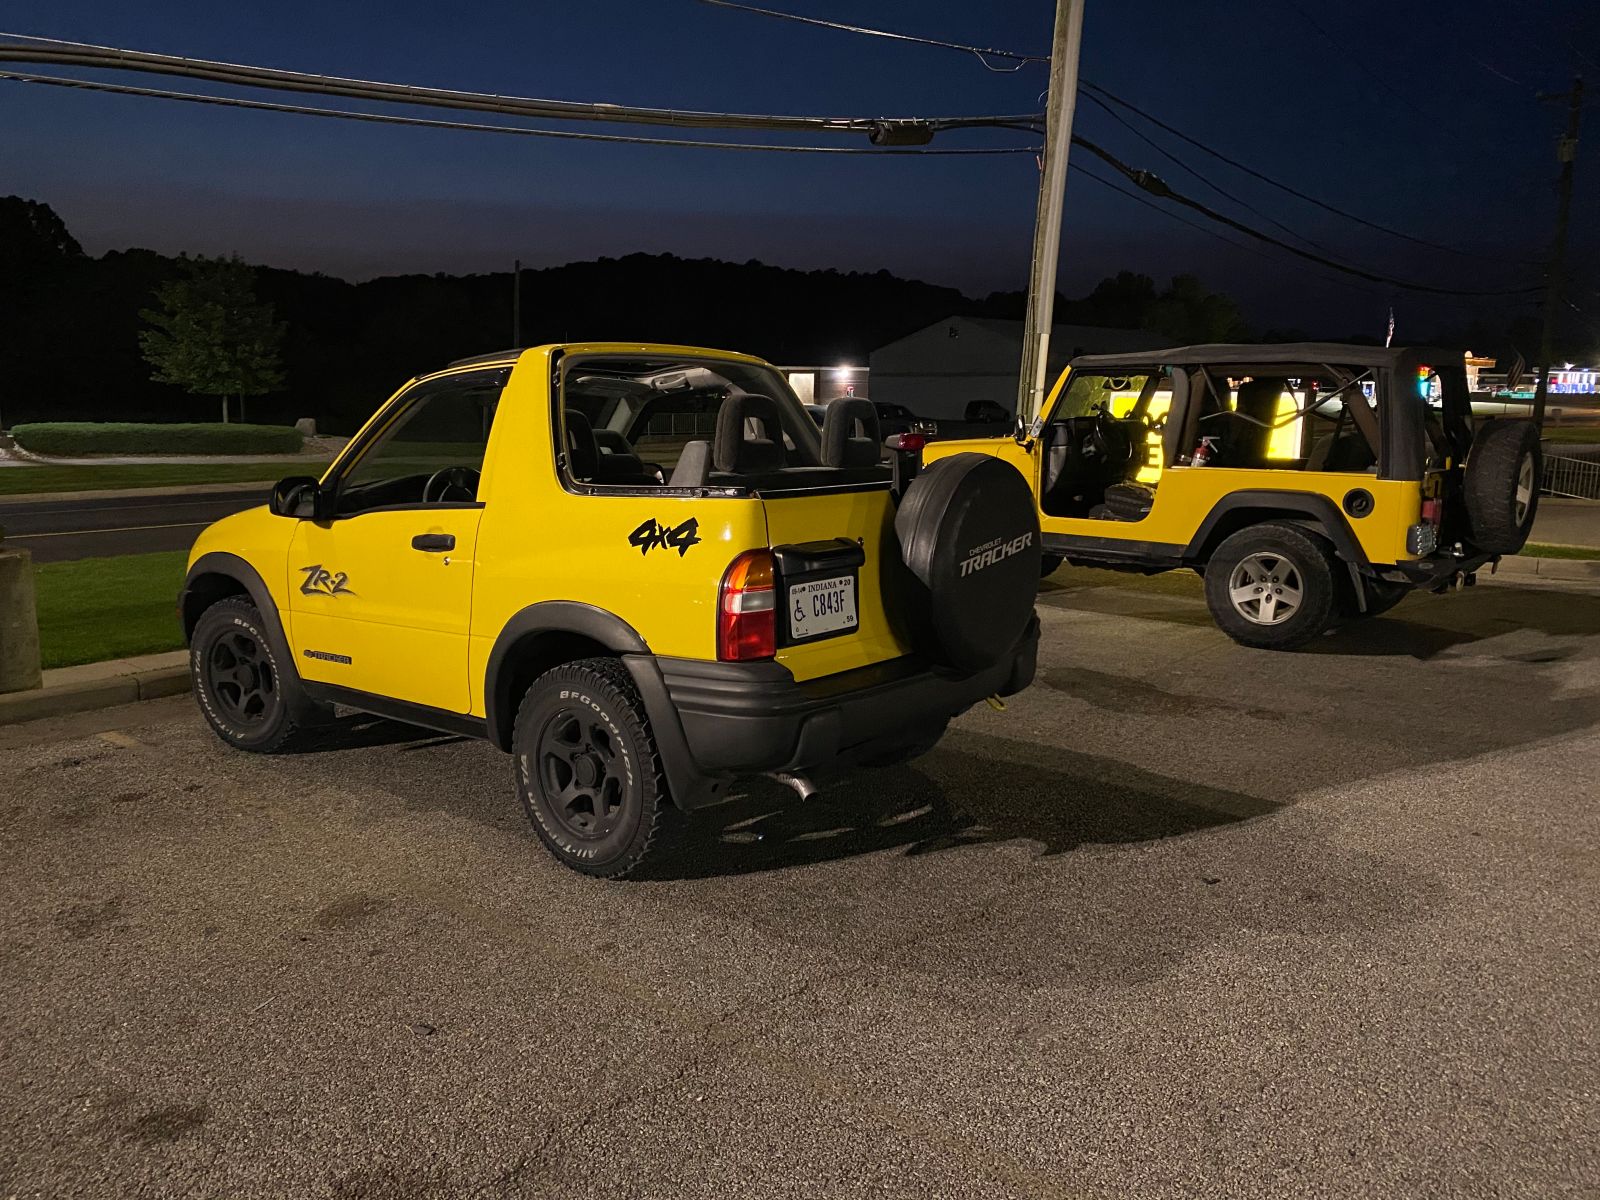 Illustration for article titled My Jeep made a friend tonight